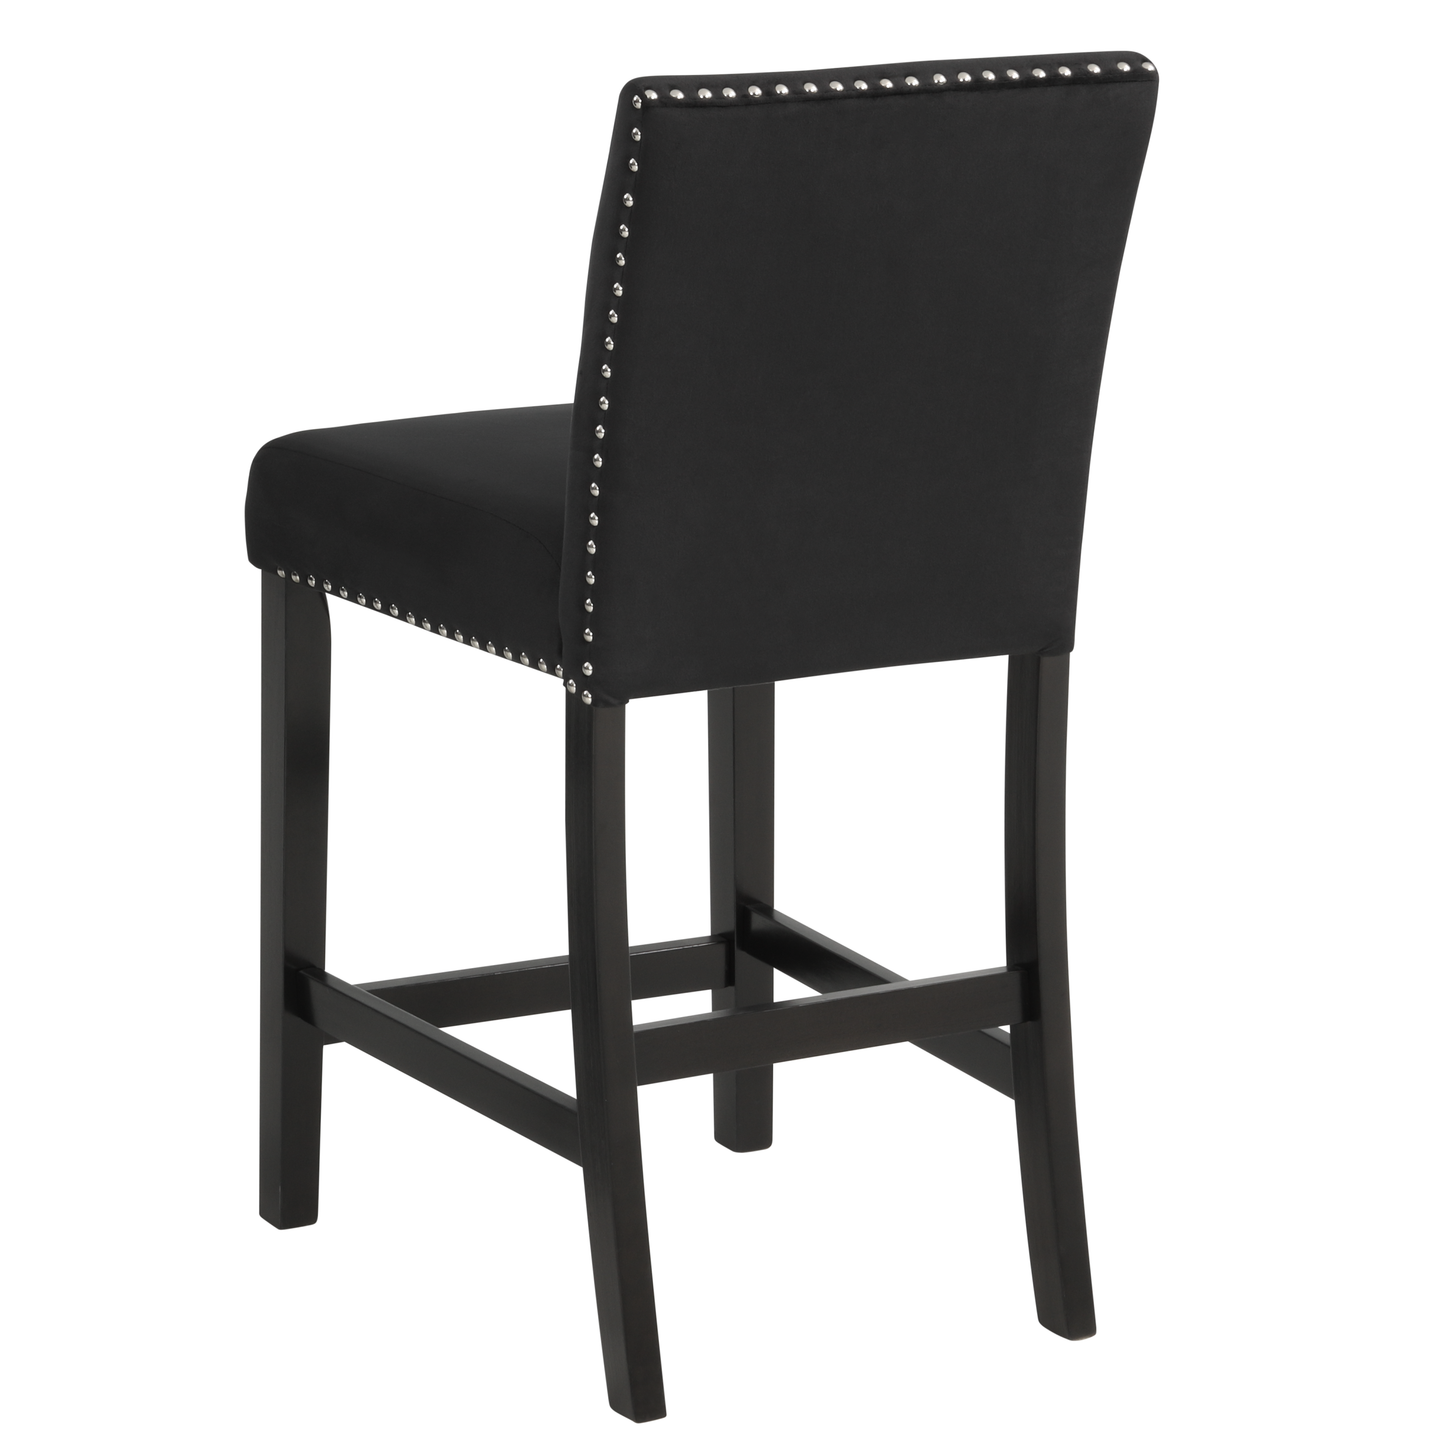 2pc Contemporary Modern Transitional Counter Height Side Chair with Nailhead Trim Black Upholstery Fabric Black Base Wooden Furniture